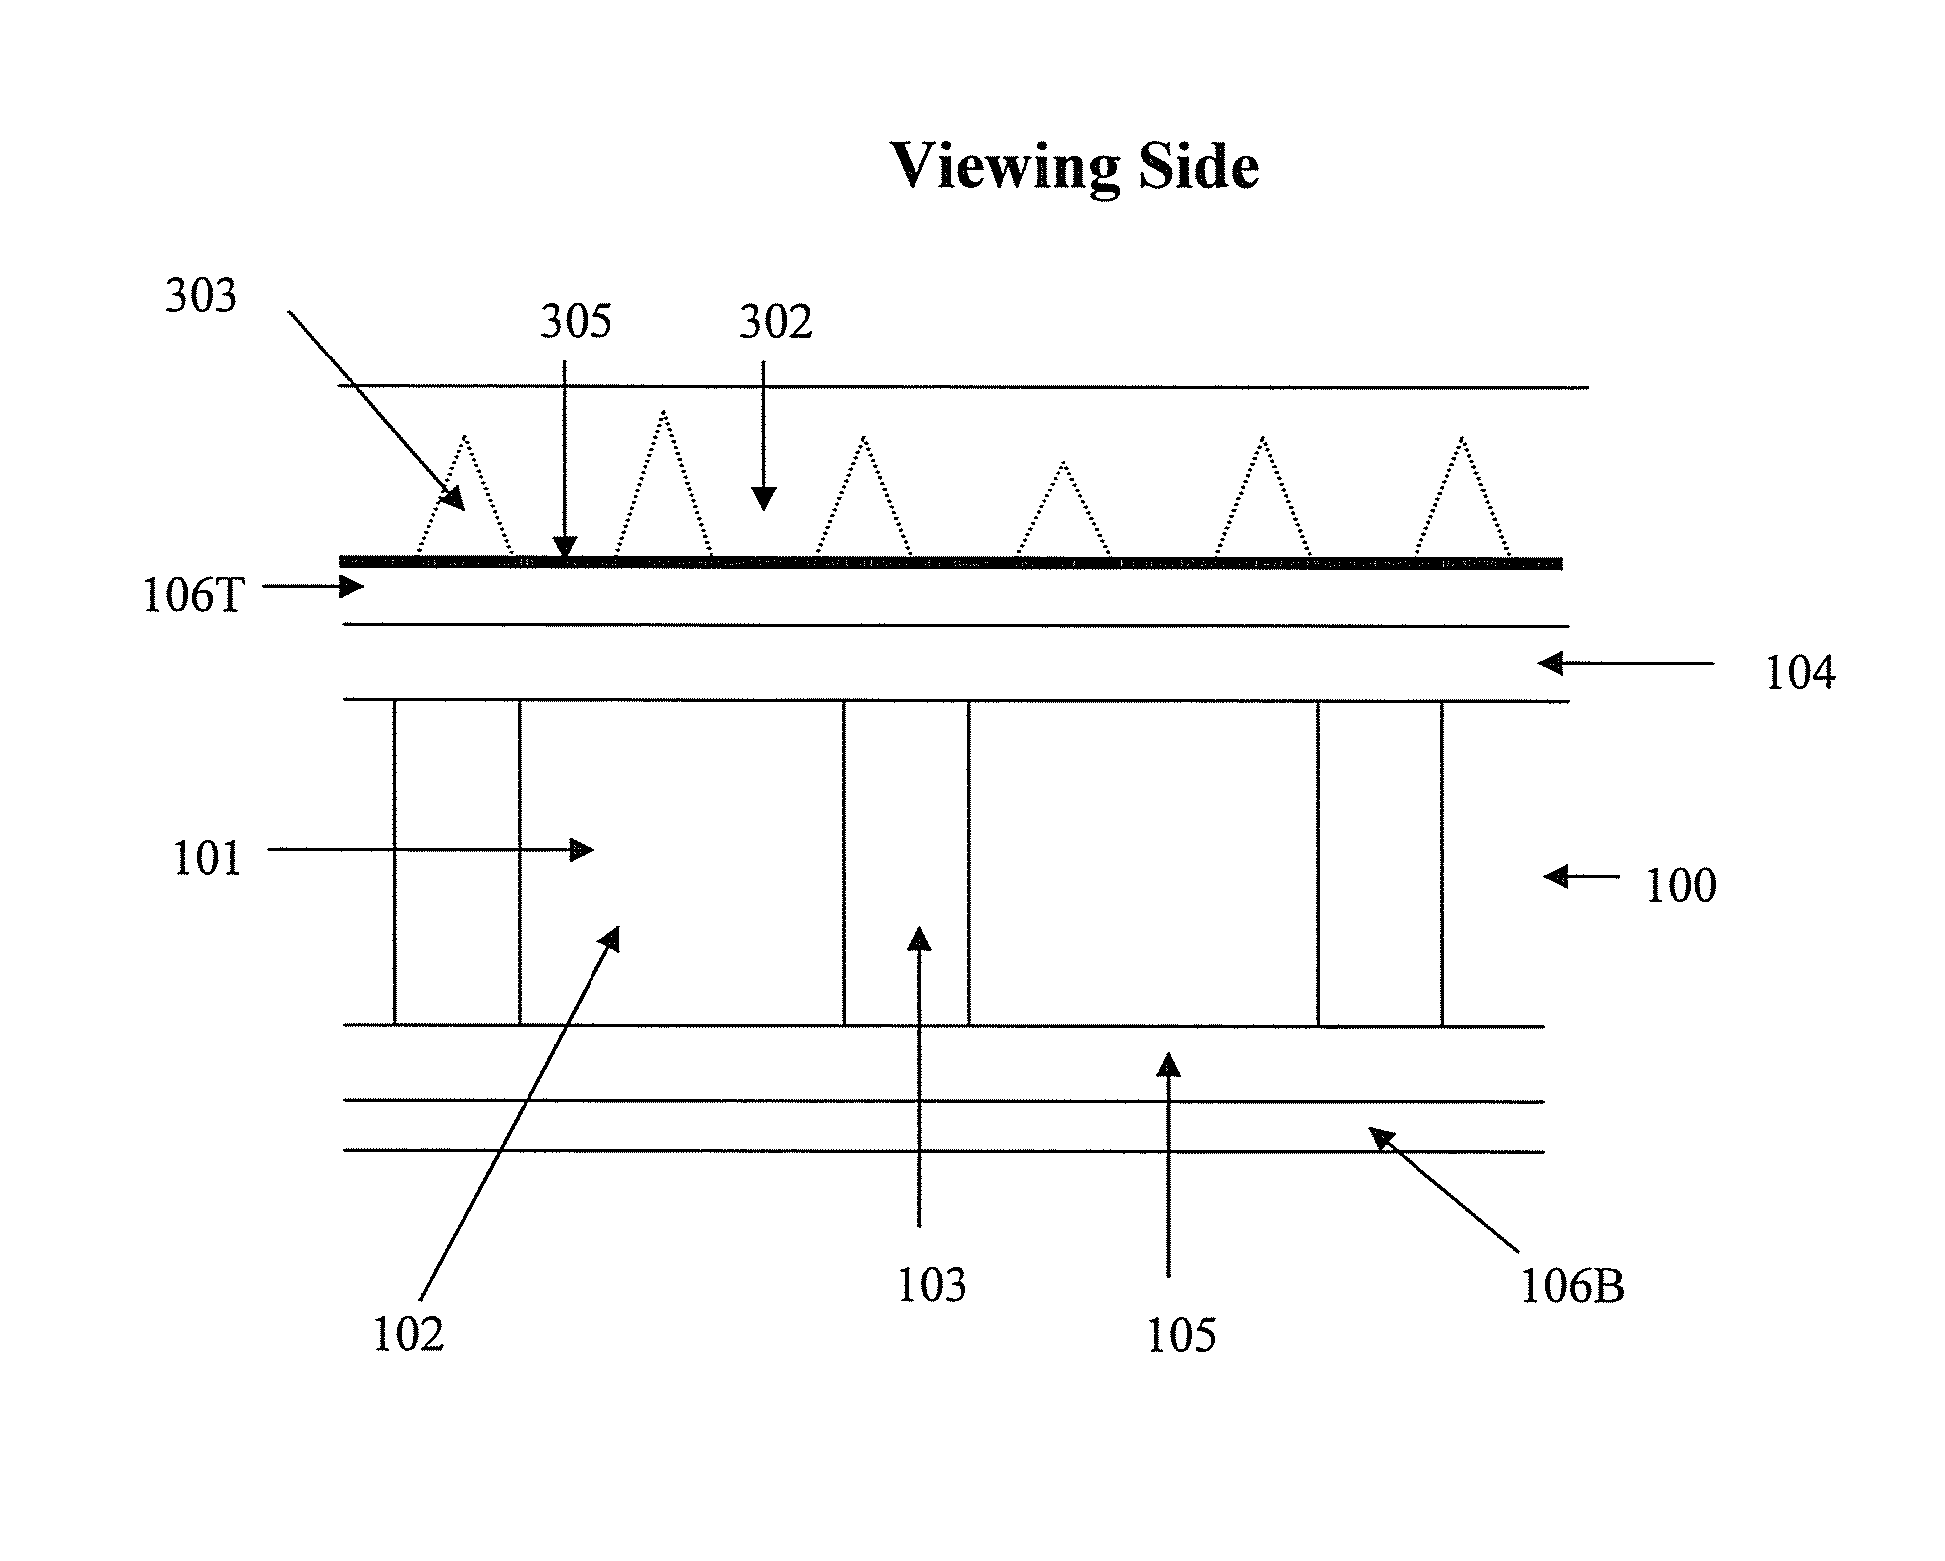 Display device assembly